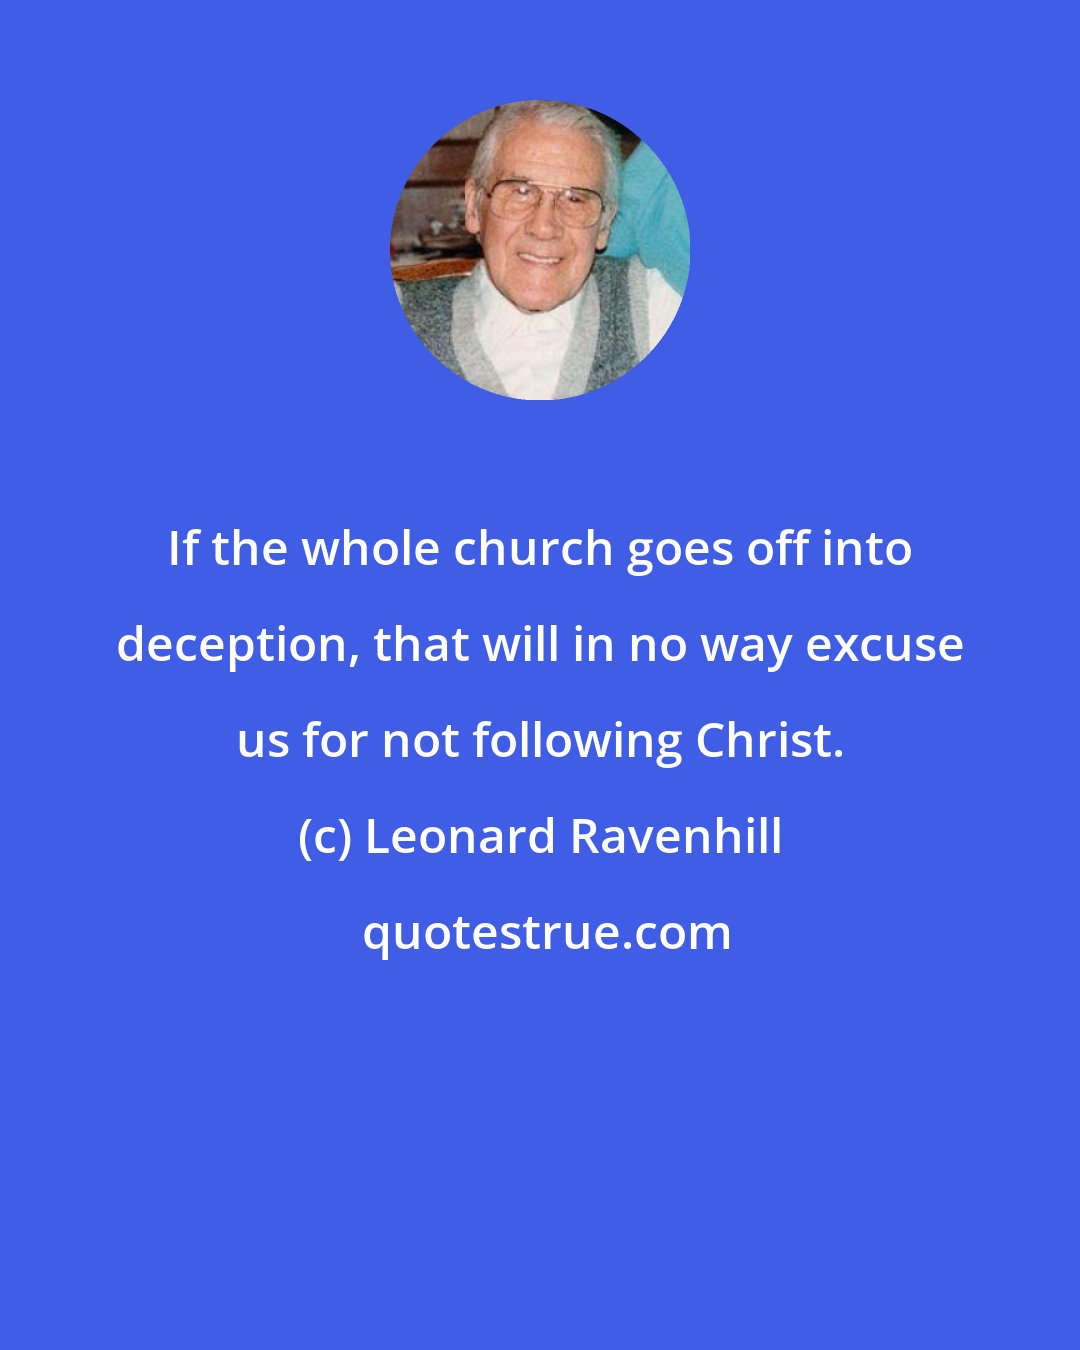 Leonard Ravenhill: If the whole church goes off into deception, that will in no way excuse us for not following Christ.